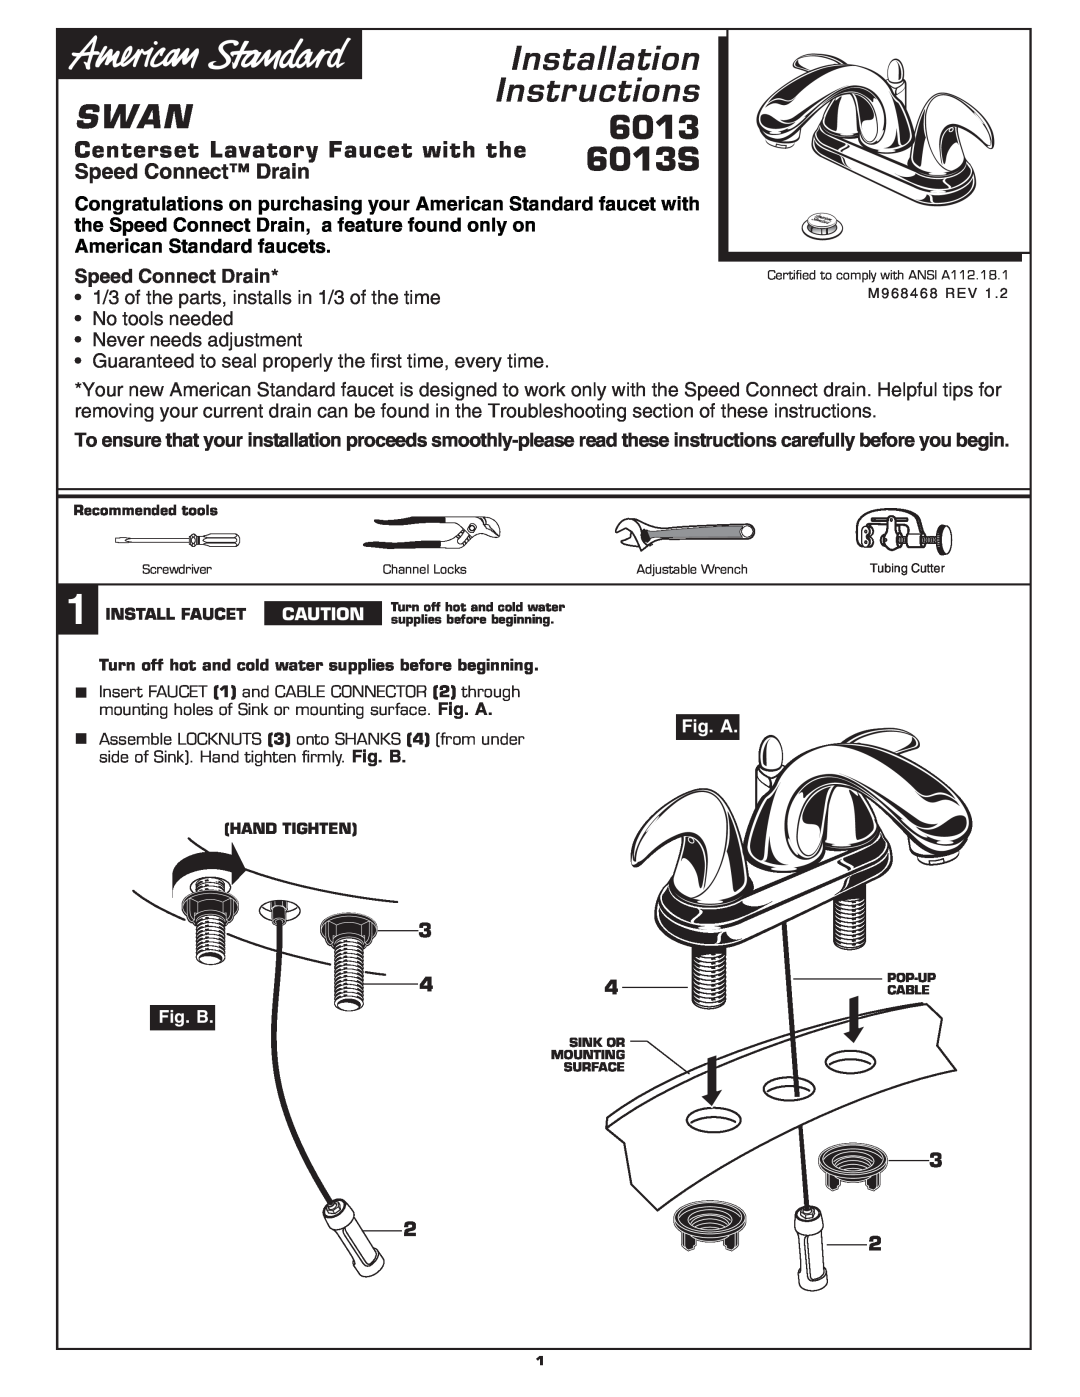 American Standard 6013S installation instructions Installation, Swan, Instructions, Centerset Lavatory Faucet with the 